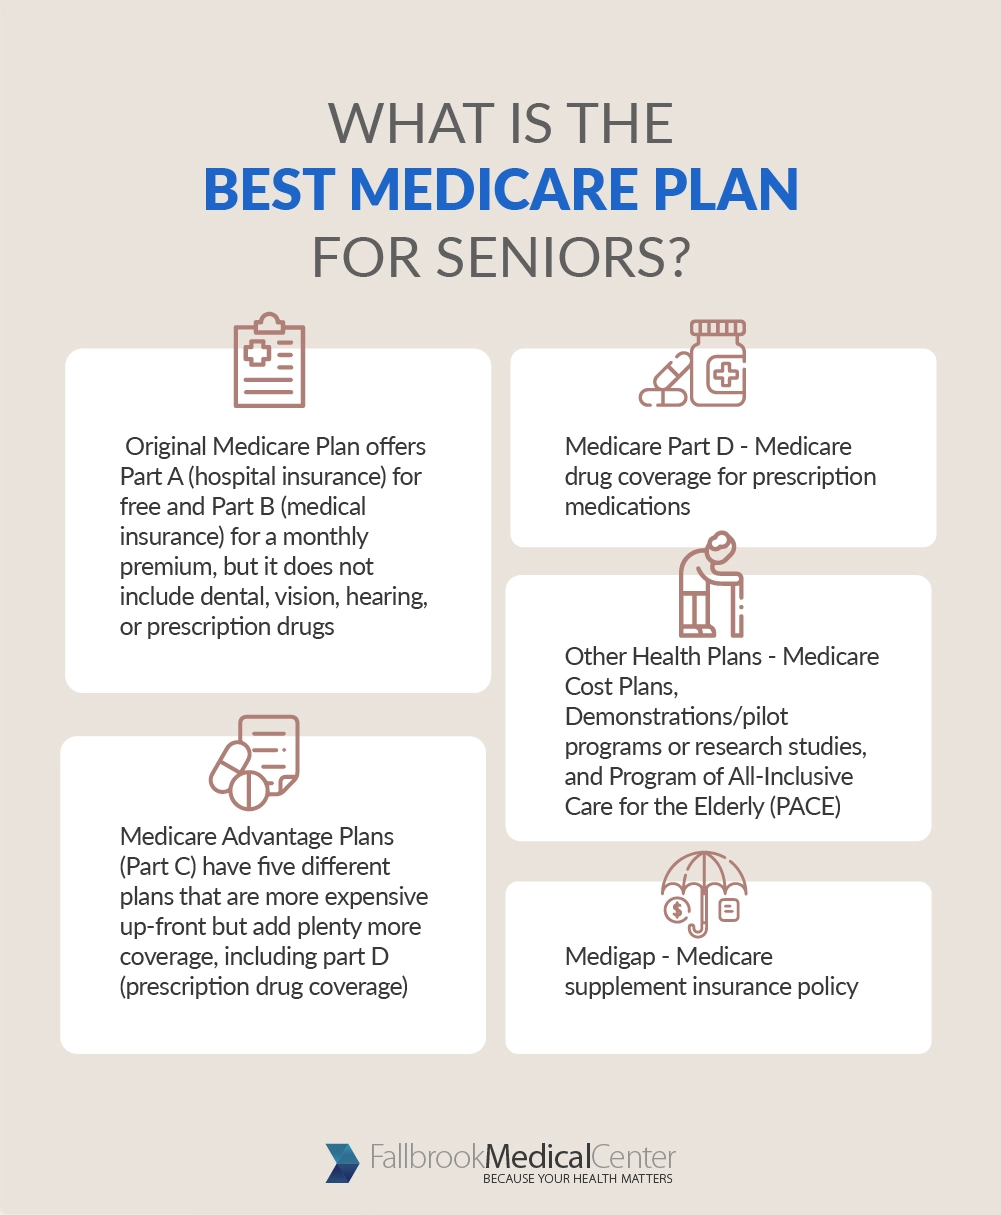 What is the Best Medicare Plan for Seniors?